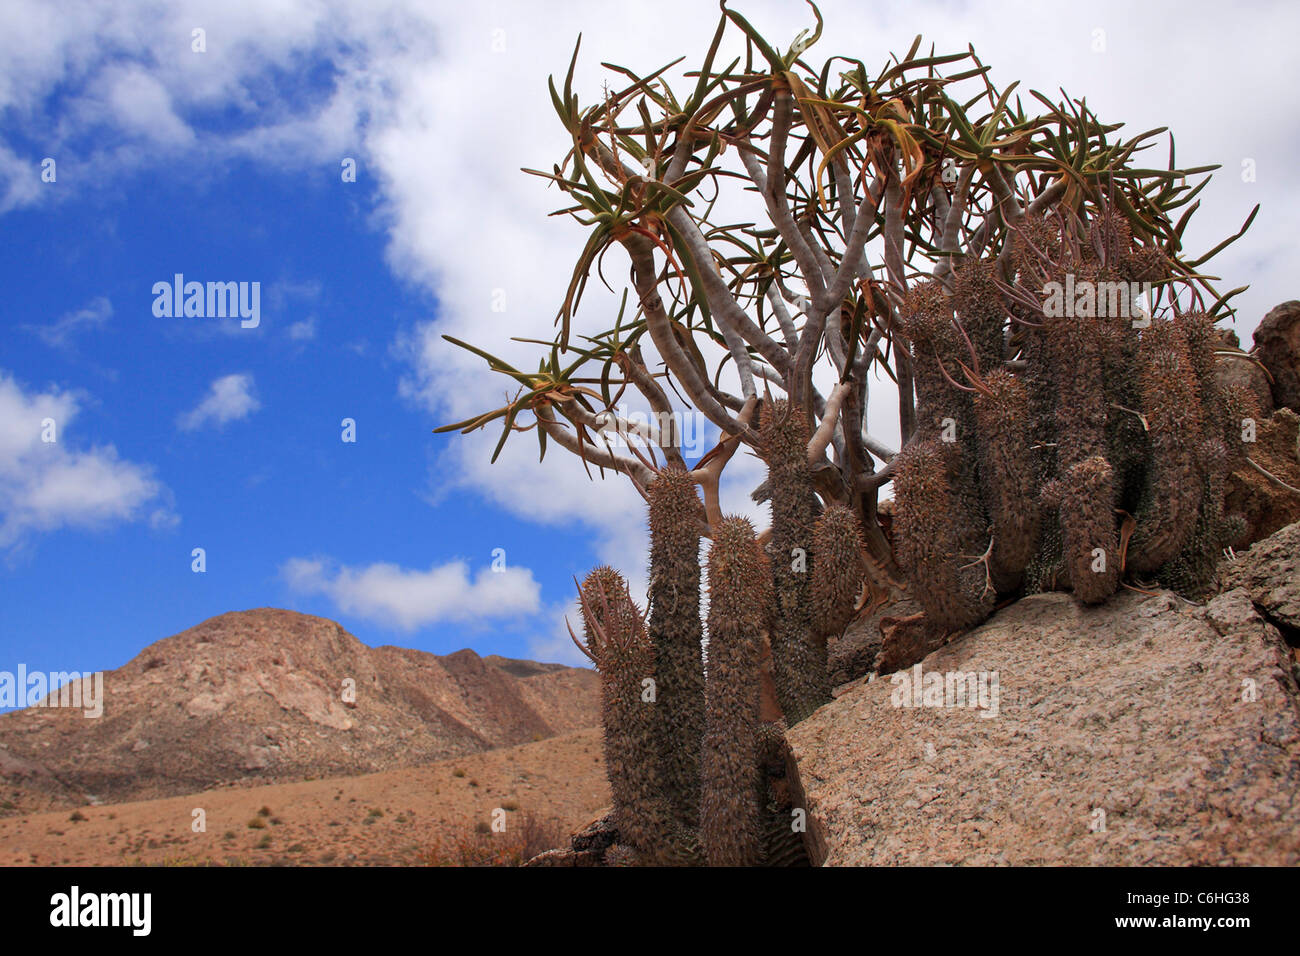 Desert landscape with Hoodia plant in the foreground Stock Photo